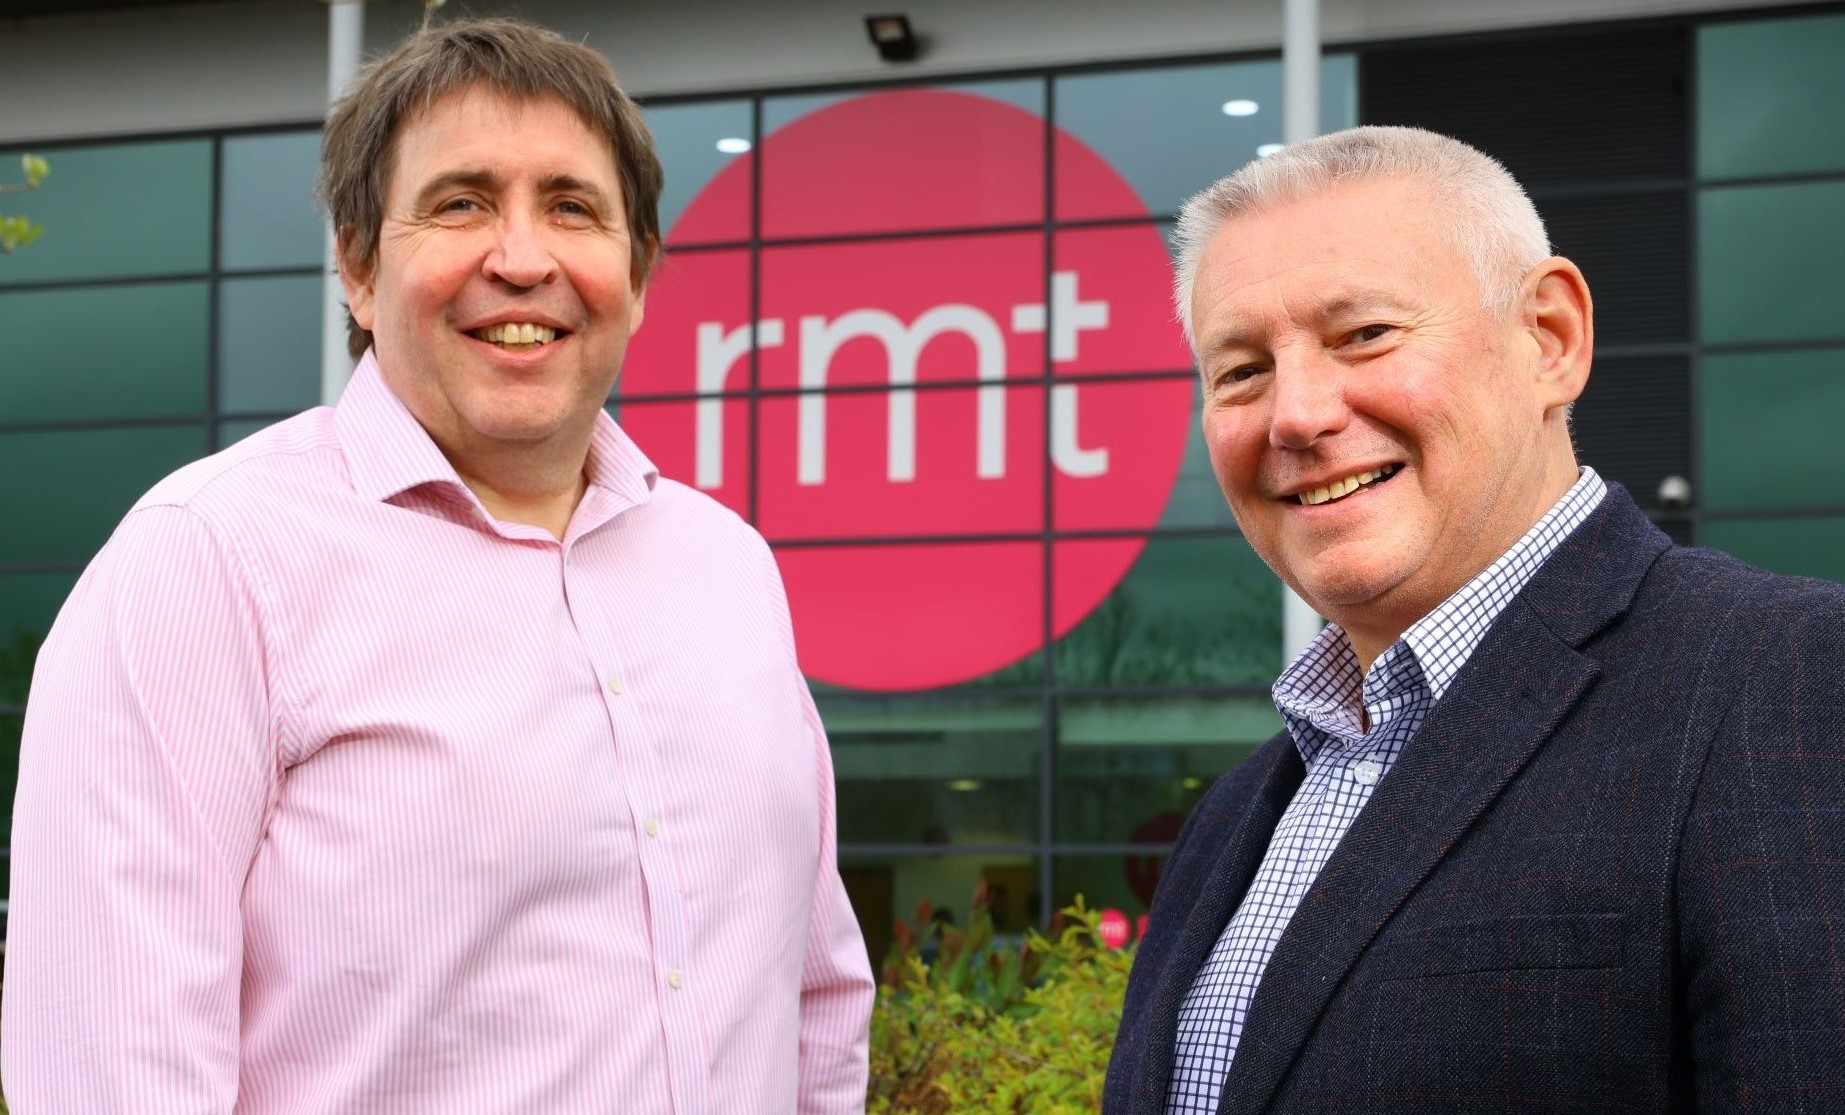 Peter McCowie, partner at McCowie & Co, with Mike Pott, managing director at RMT Accountants & Business Advisors